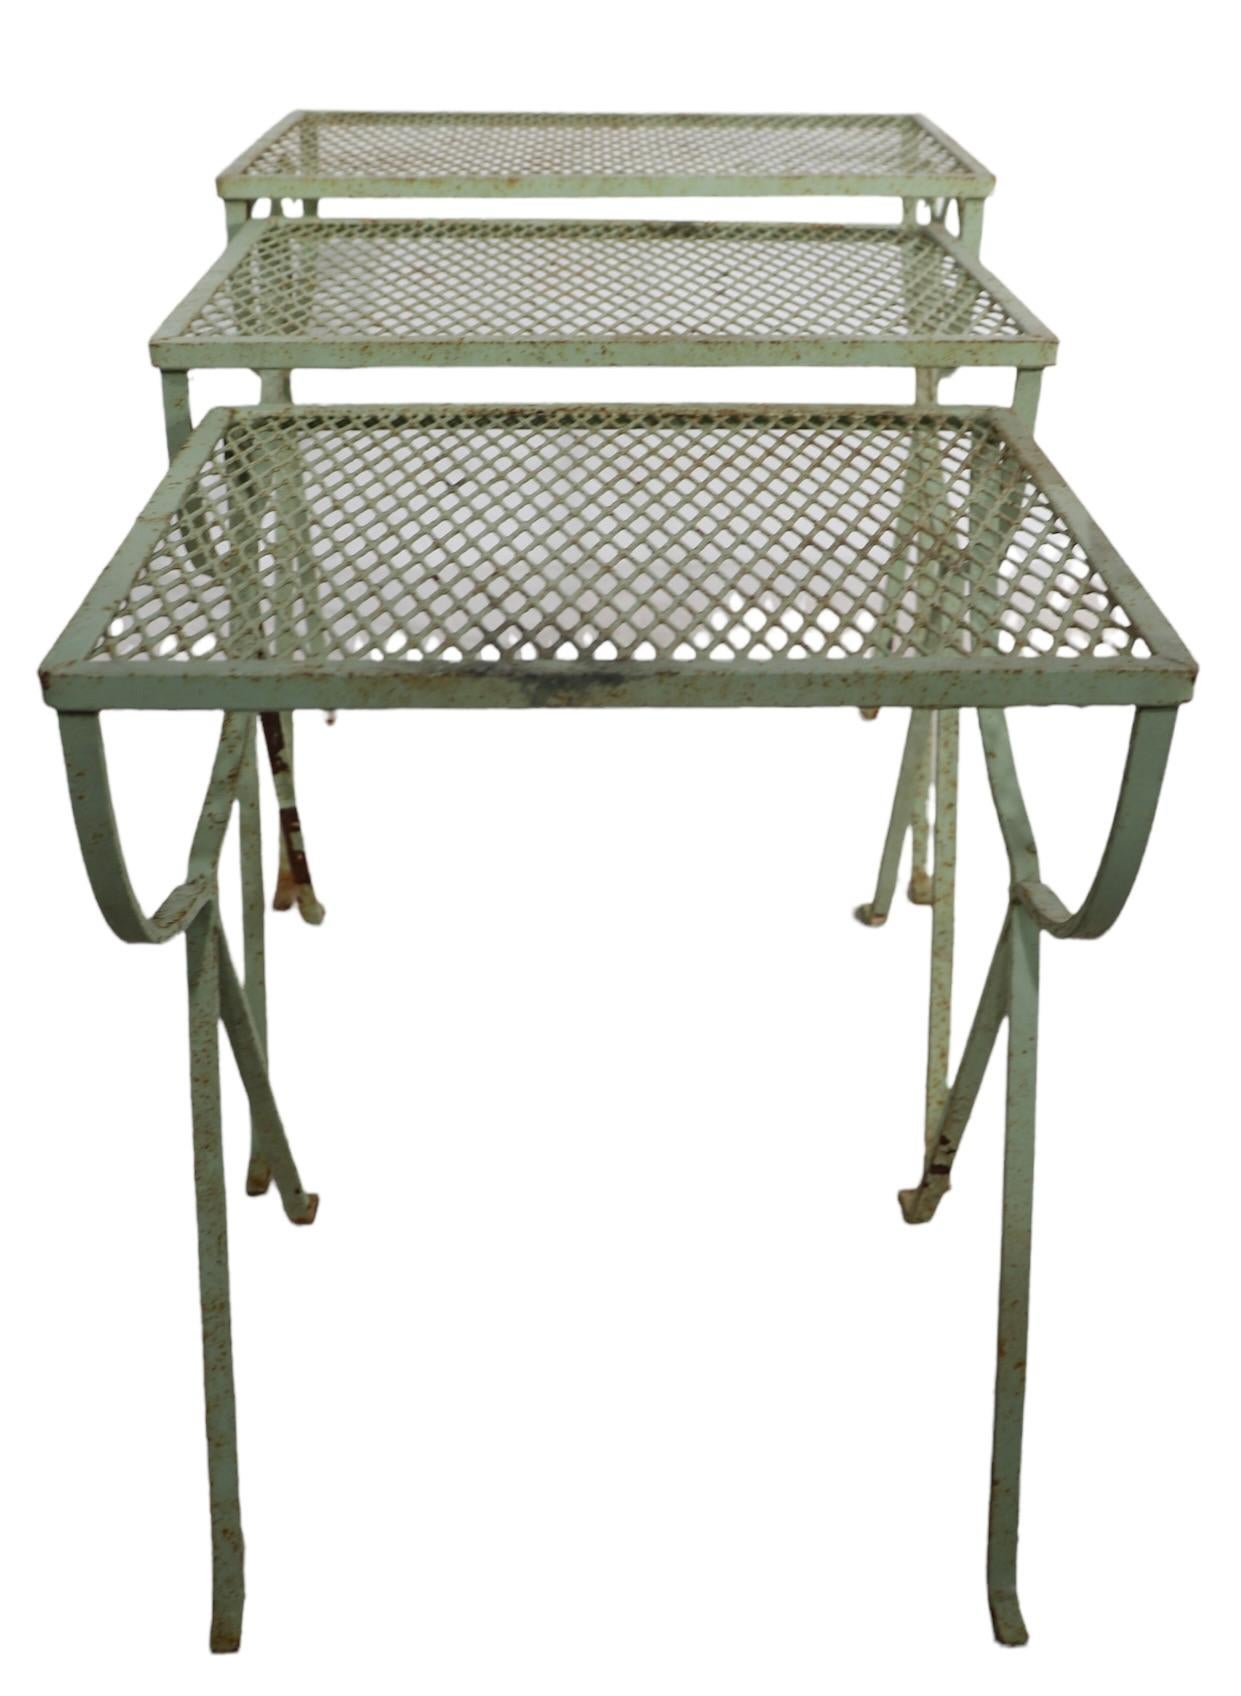 American Set of Three Wrought Iron  Nesting Garden Patio Poolside Tables by Salterini